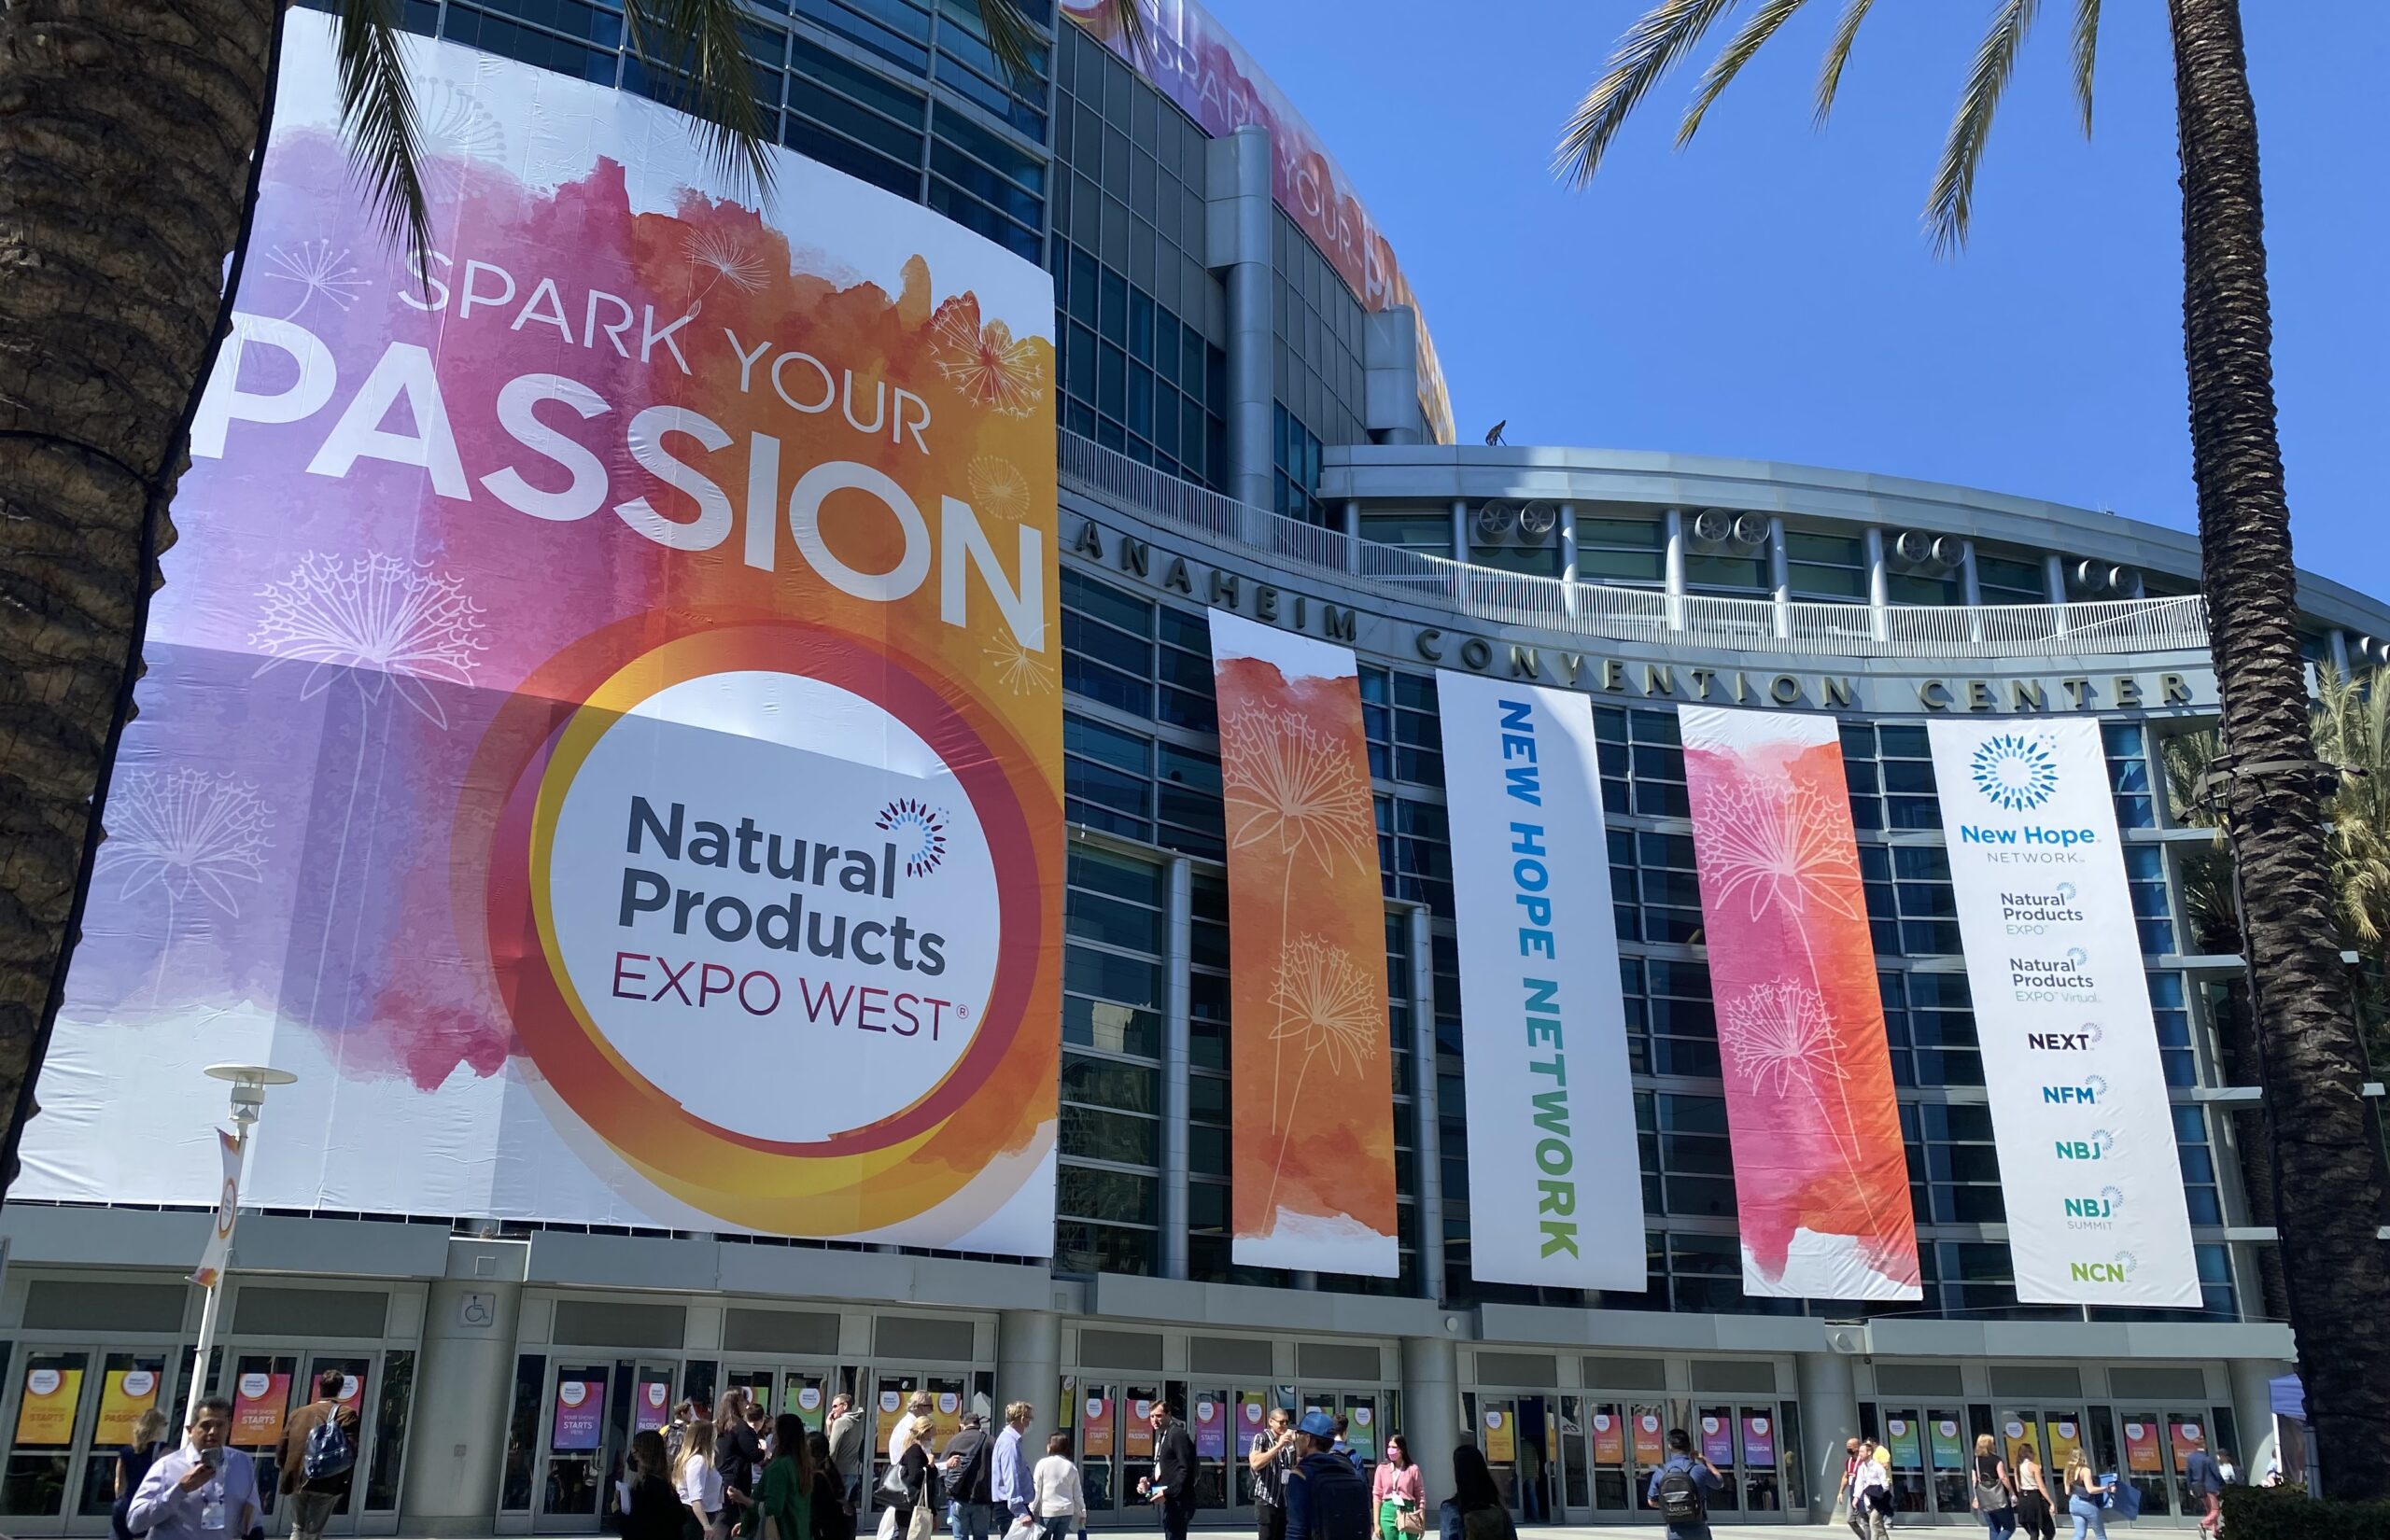 10 Ways to Get the Most Out of Your Time at the Expo West The